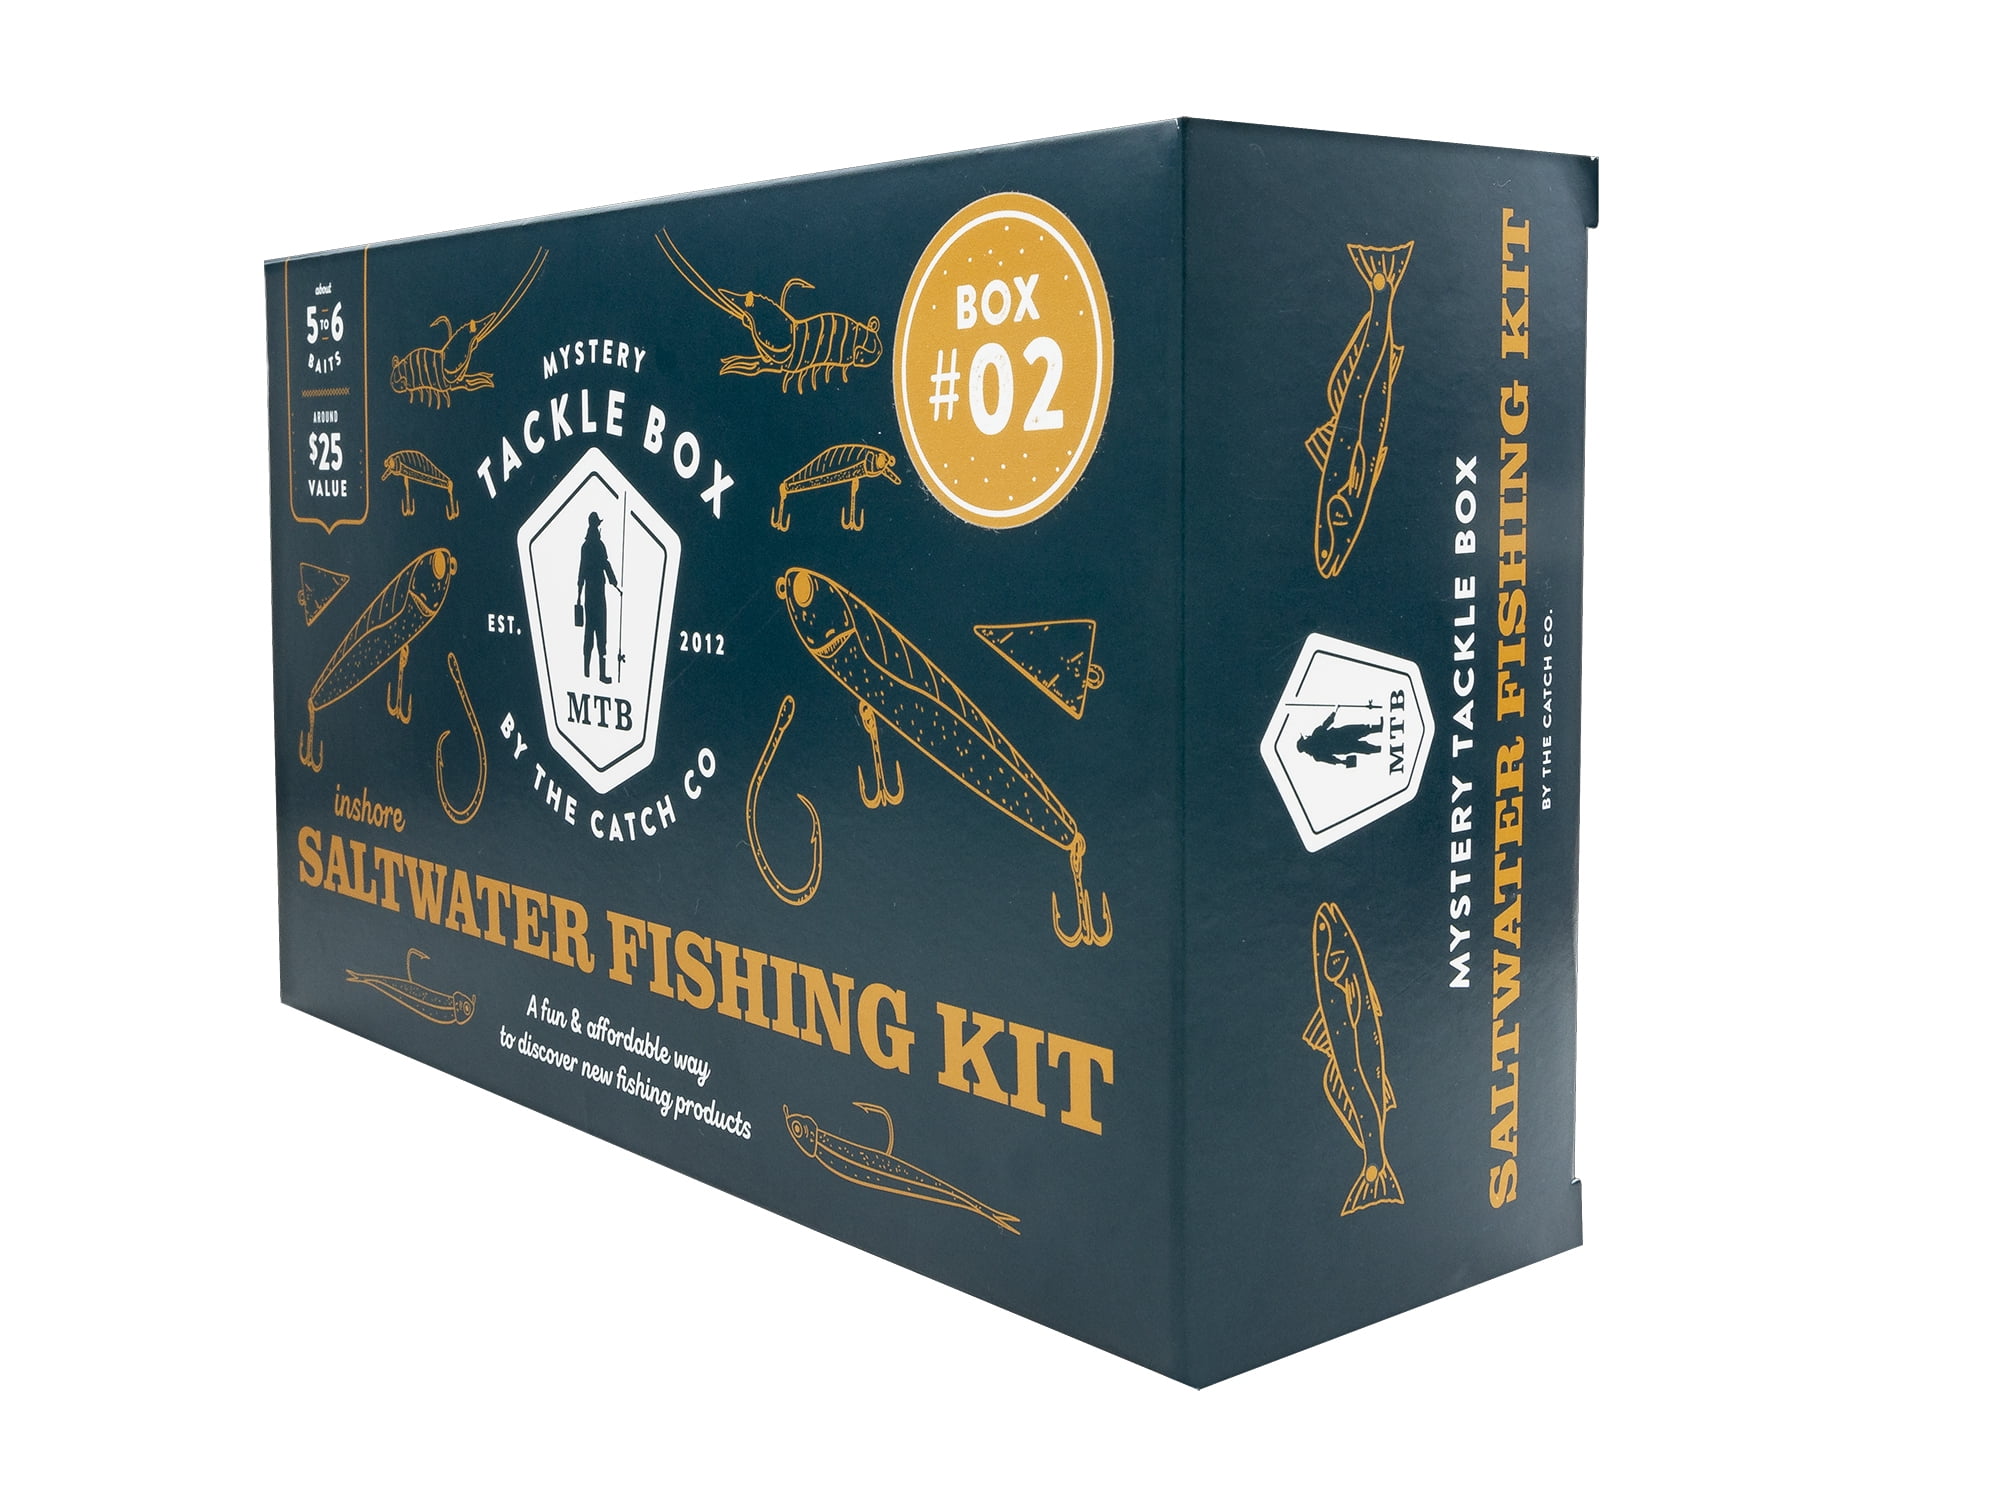 Mystery Tackle Box Fishing Kit Saltwater 